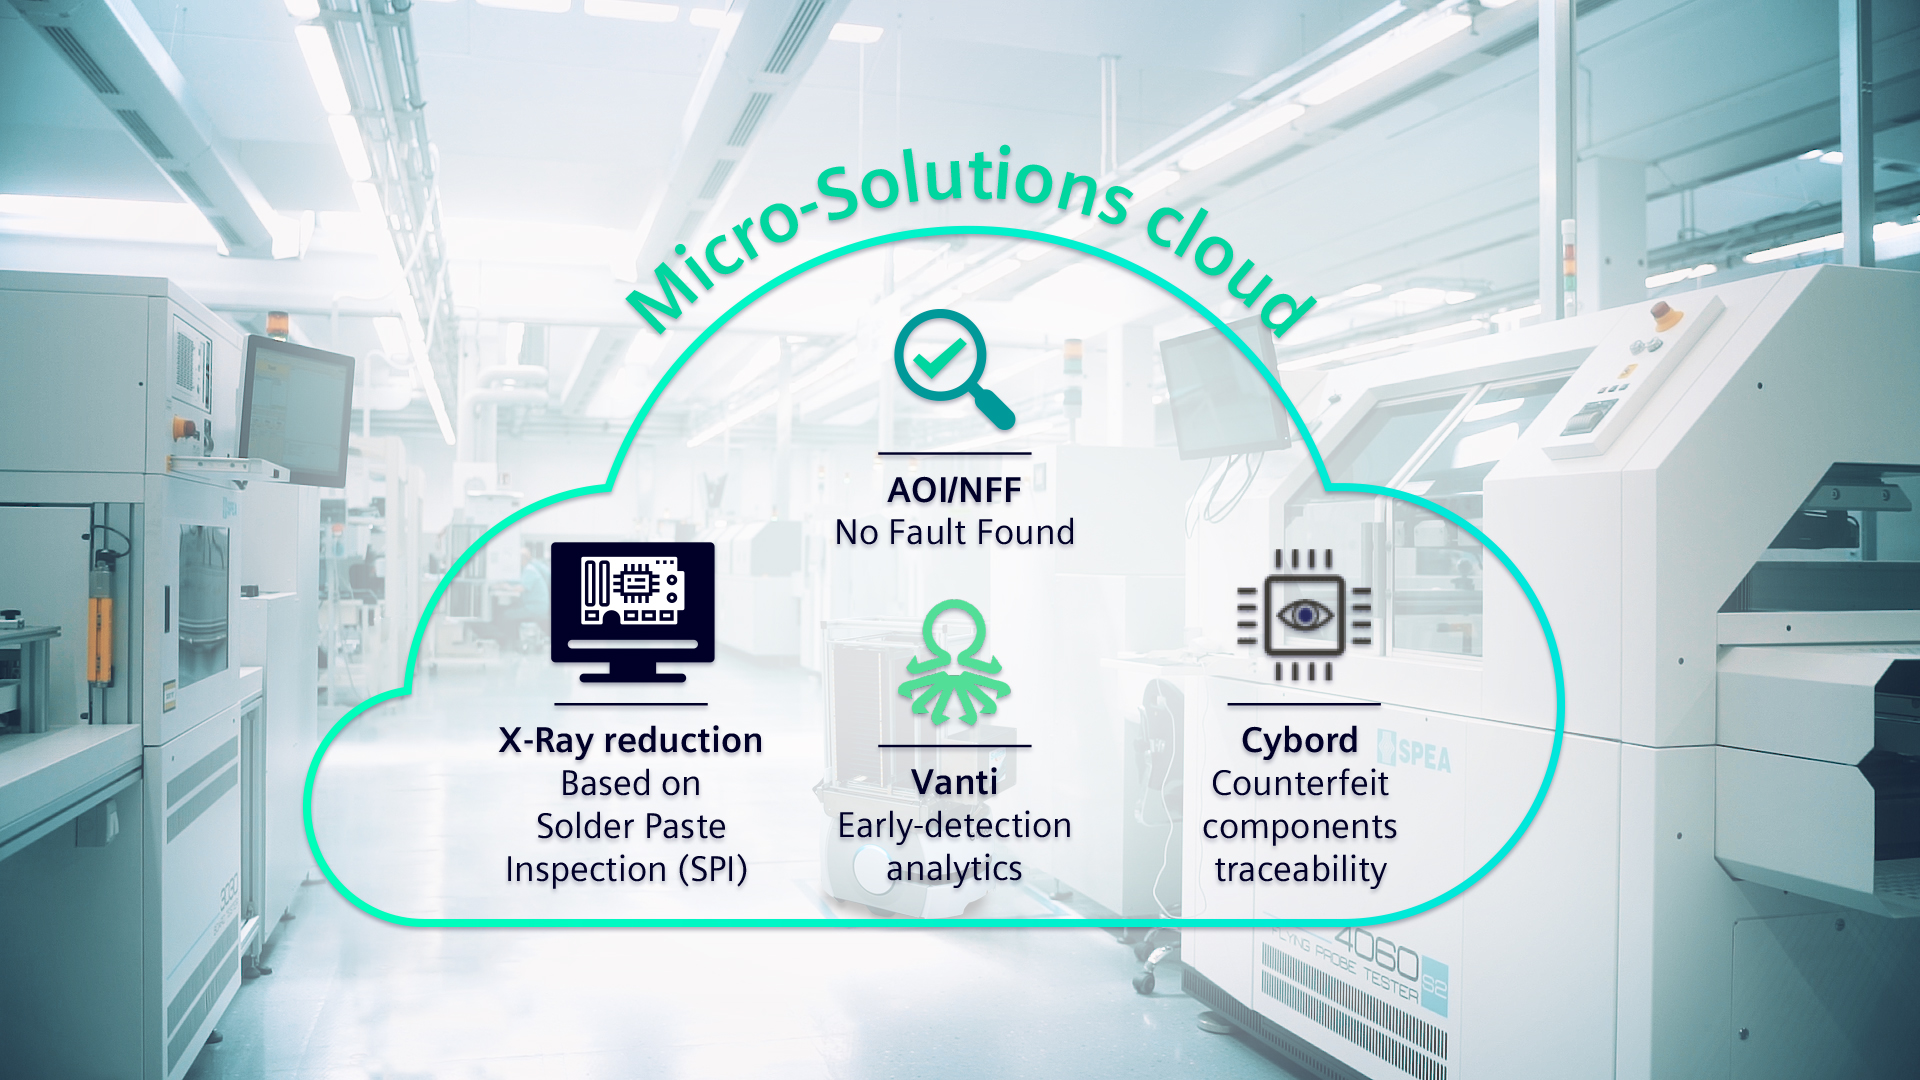 Solving electronics manufacturing challenges with micro-solutions